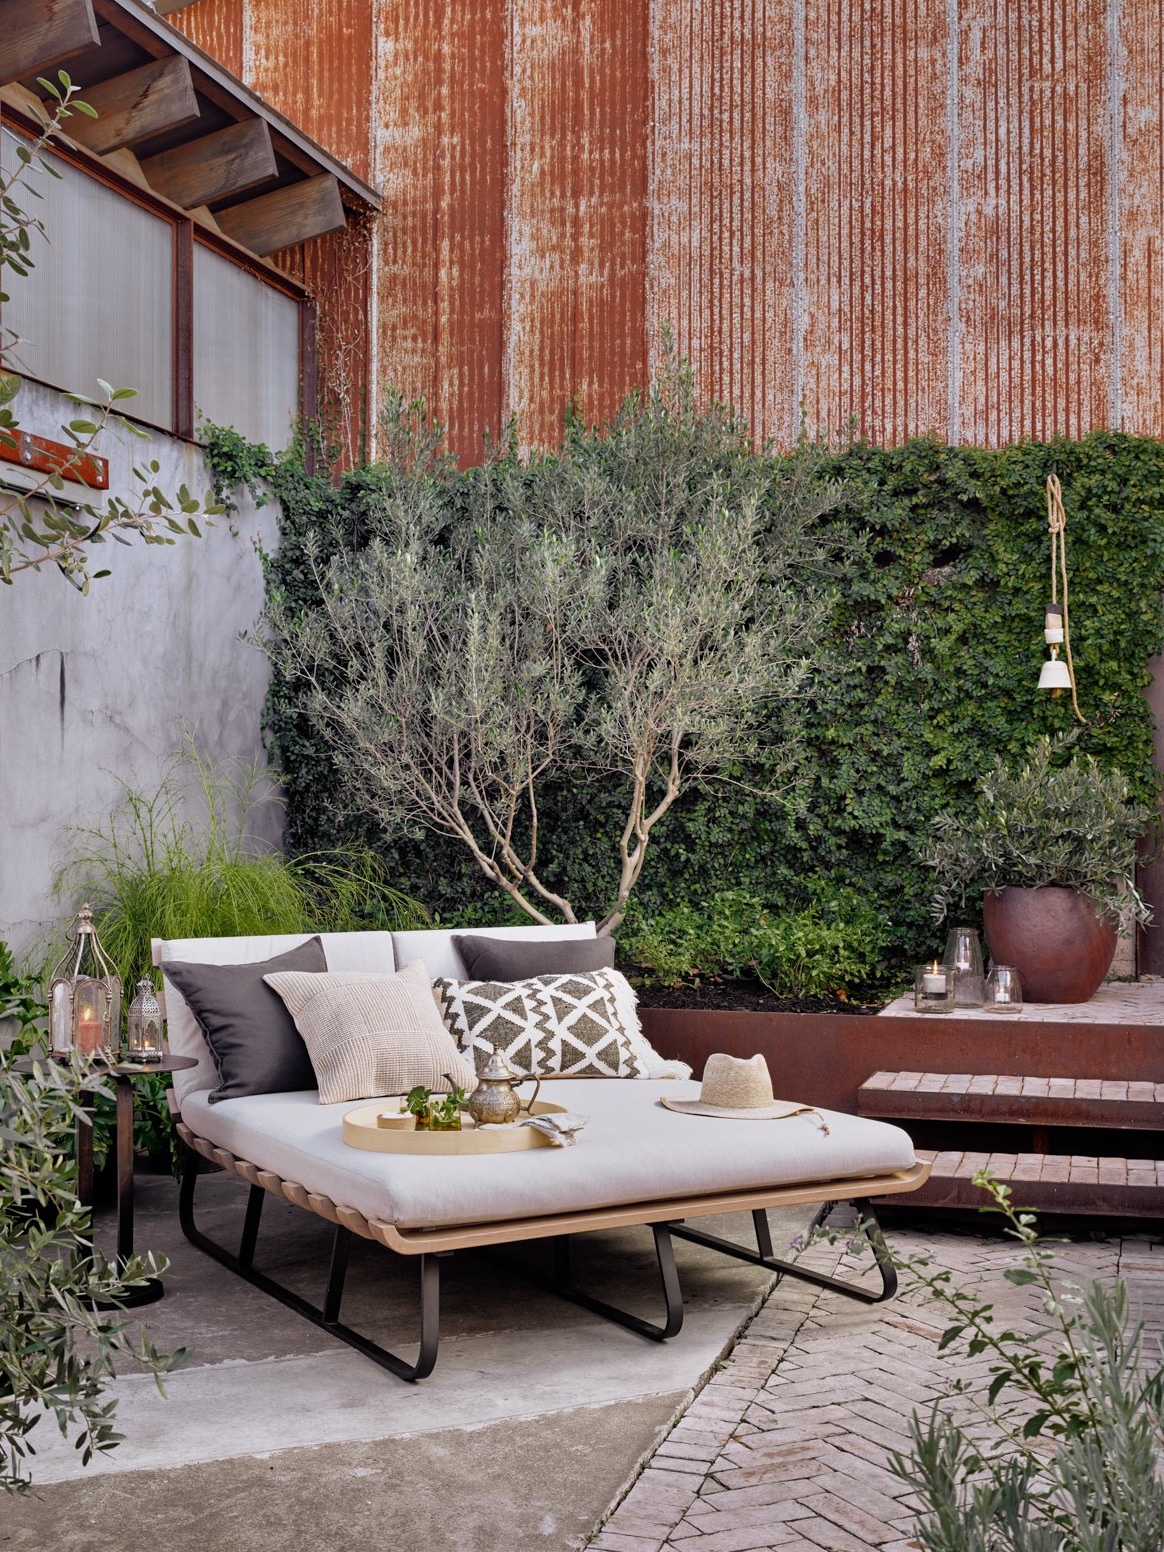 Baker Design Group - These Outdoor Trends Are Hot!